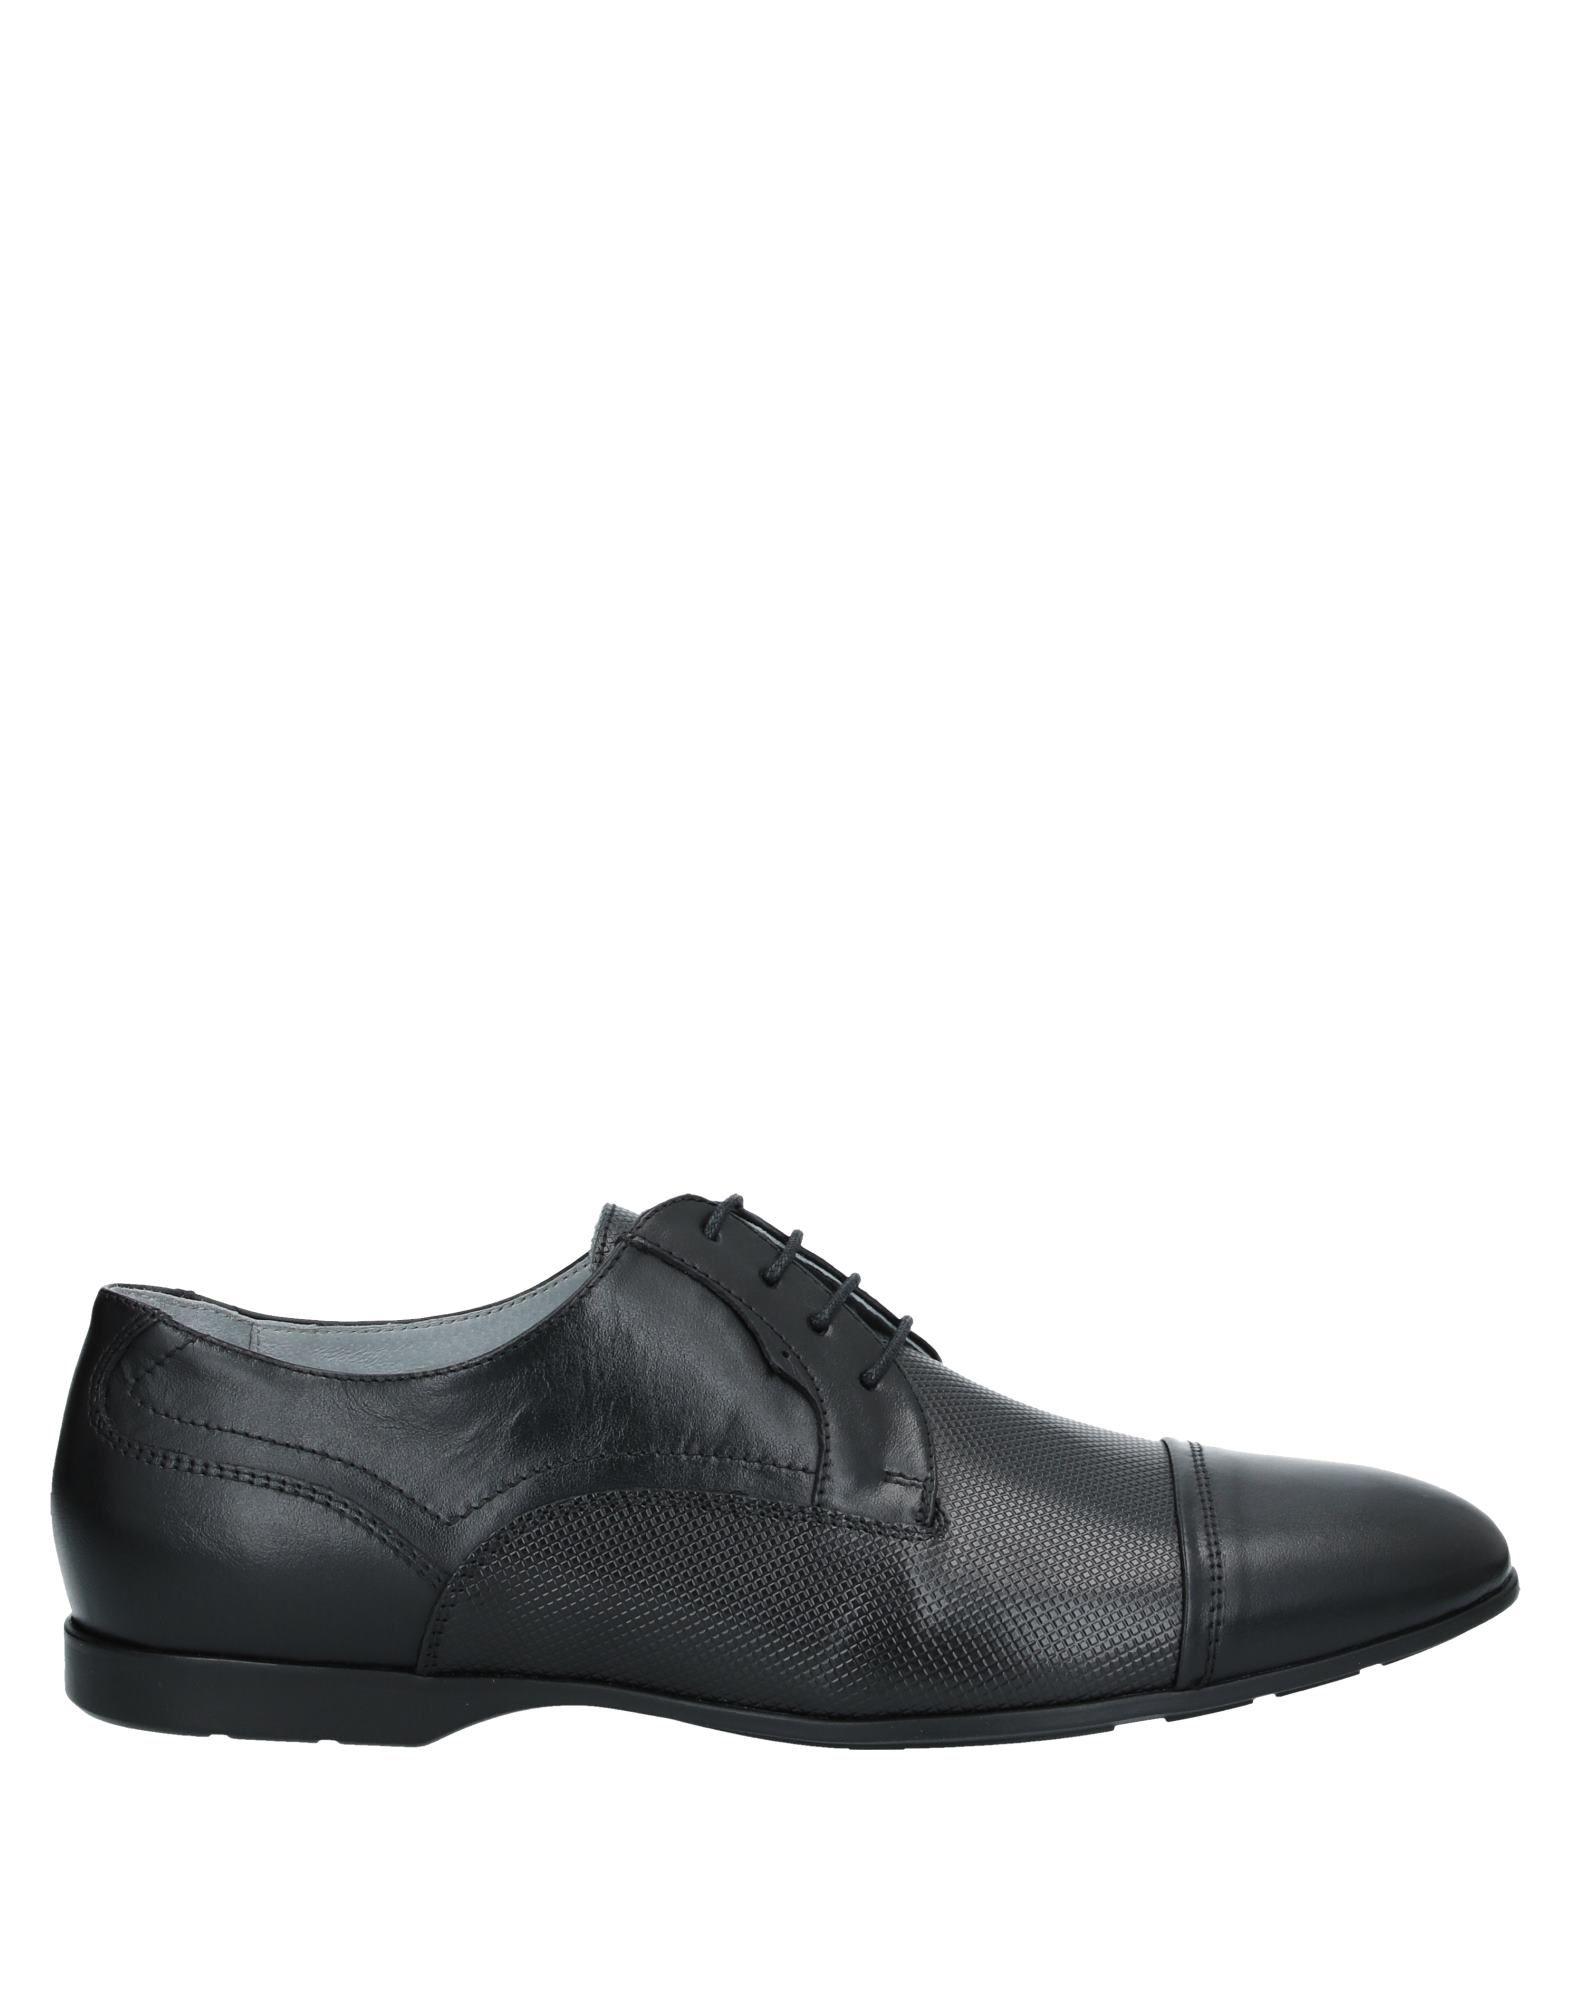 Fabiano Ricci Leather Lace-up Shoe in Black for Men - Lyst